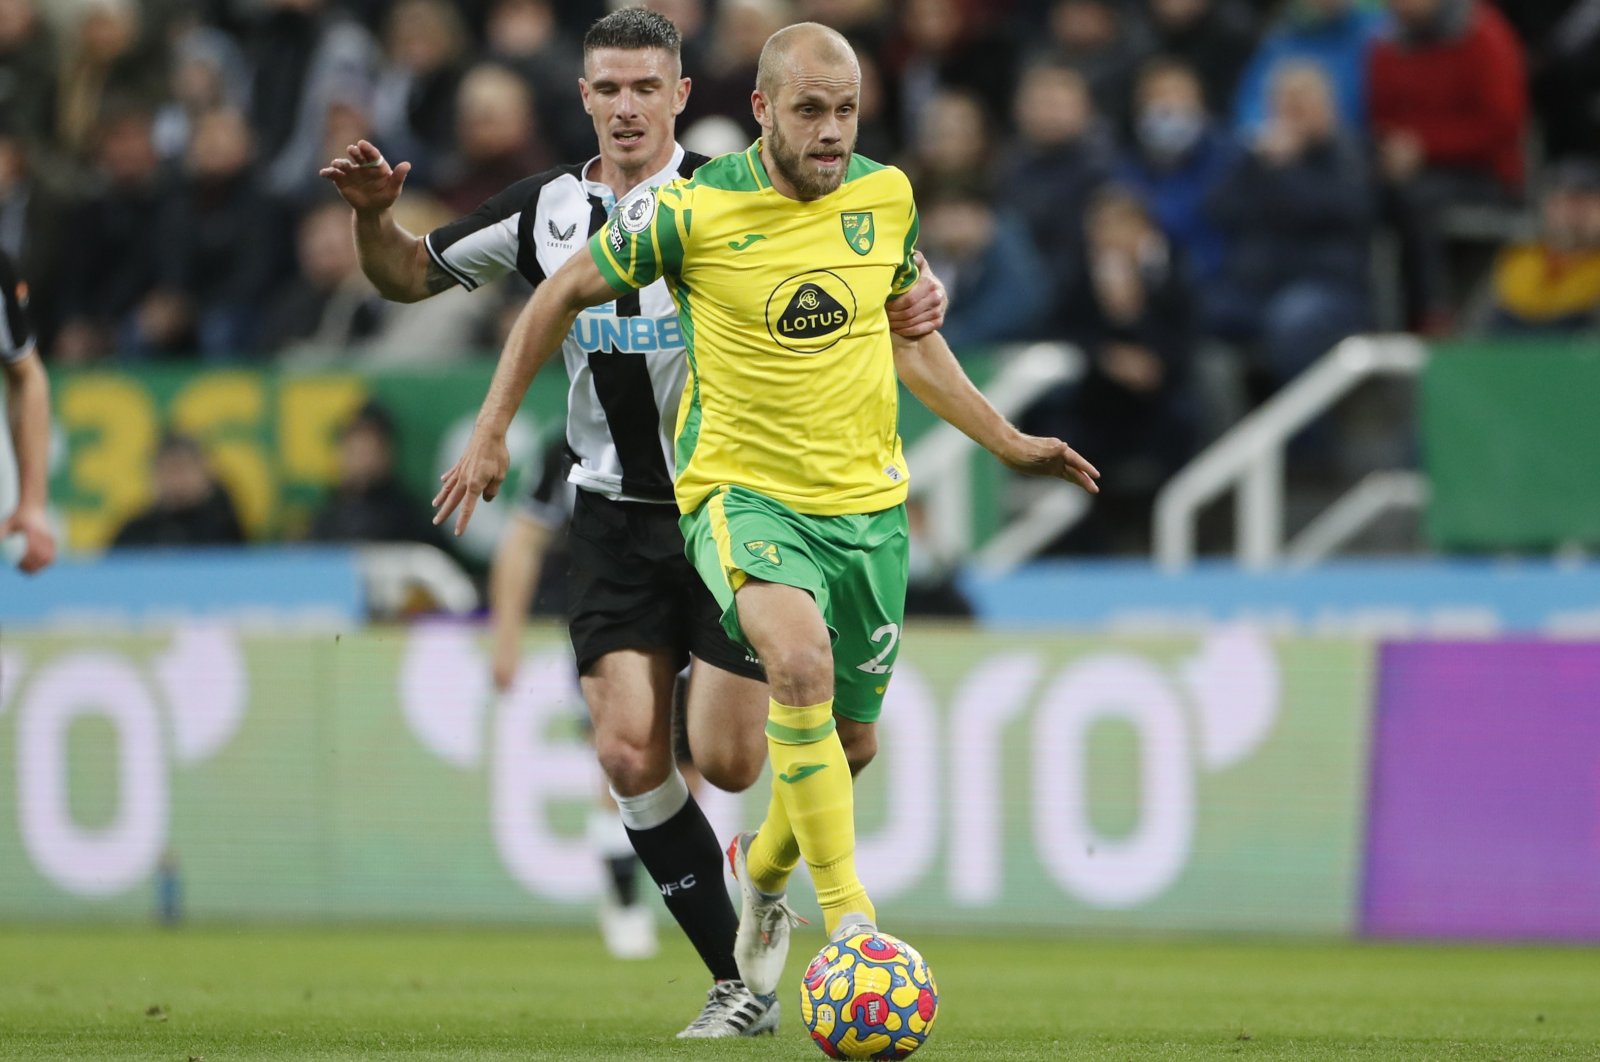 Newcastle United&#039;s Ciaran Clark (L) and Norwich City&#039;s Teemu Pukki in action during a Premier League game at St. James&#039; Park, Newcastle, England, Nov. 30, 2021. (Reuters Photo)